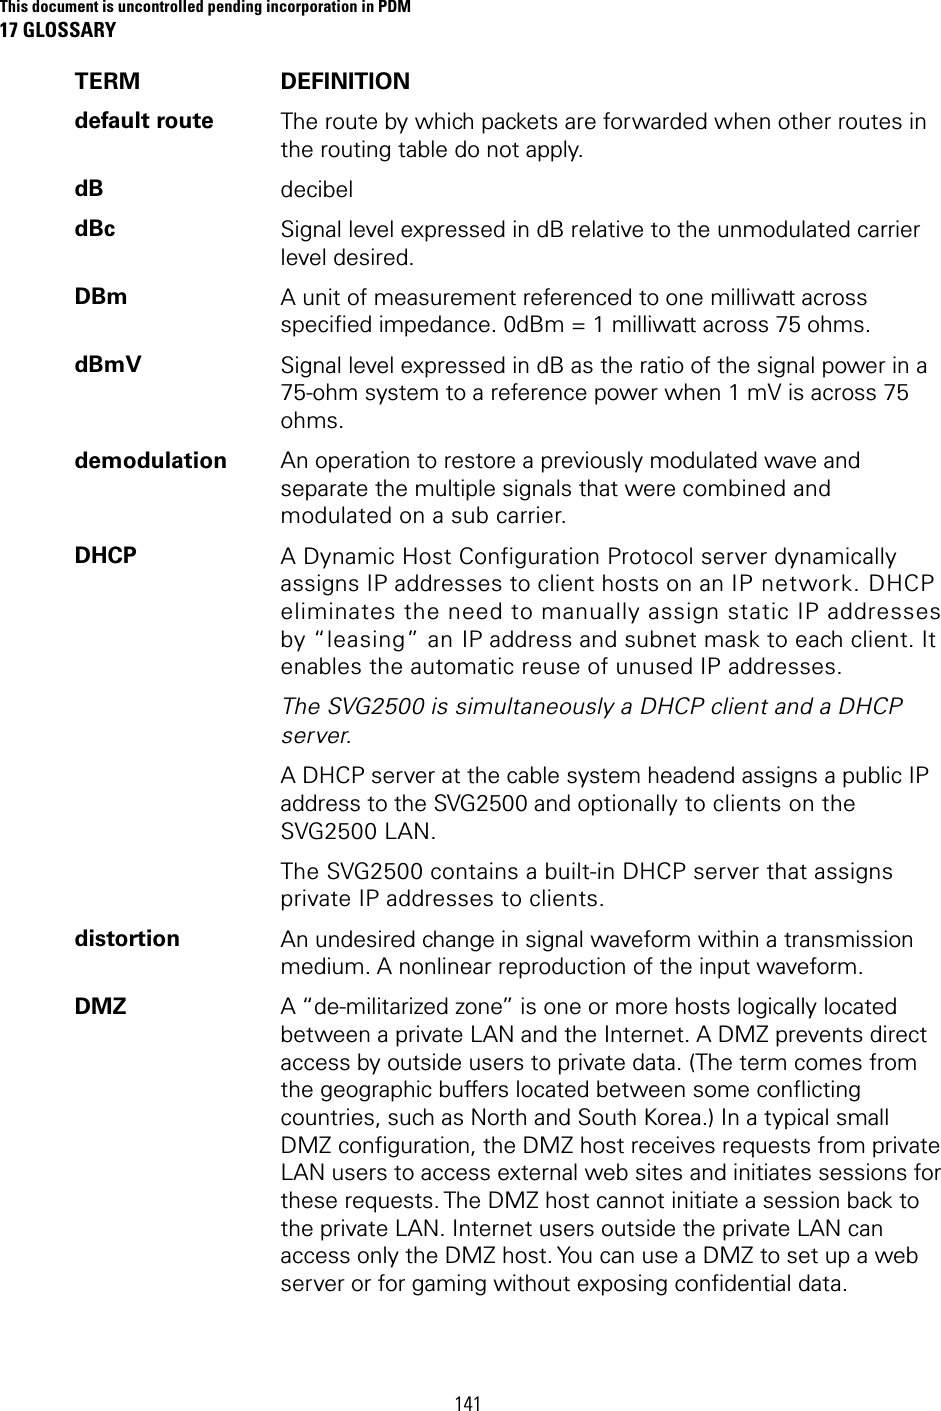 This document is uncontrolled pending incorporation in PDM 17 GLOSSARY  141 TERM DEFINITION default route  The route by which packets are forwarded when other routes in the routing table do not apply. dB  decibel dBc  Signal level expressed in dB relative to the unmodulated carrier level desired. DBm  A unit of measurement referenced to one milliwatt across specified impedance. 0dBm = 1 milliwatt across 75 ohms. dBmV  Signal level expressed in dB as the ratio of the signal power in a 75-ohm system to a reference power when 1 mV is across 75 ohms. demodulation  An operation to restore a previously modulated wave and separate the multiple signals that were combined and modulated on a sub carrier. DHCP  A Dynamic Host Configuration Protocol server dynamically assigns IP addresses to client hosts on an IP network. DHCP eliminates the need to manually assign static IP addresses by “leasing” an IP address and subnet mask to each client. It enables the automatic reuse of unused IP addresses. The SVG2500 is simultaneously a DHCP client and a DHCP server. A DHCP server at the cable system headend assigns a public IP address to the SVG2500 and optionally to clients on the SVG2500 LAN. The SVG2500 contains a built-in DHCP server that assigns private IP addresses to clients. distortion  An undesired change in signal waveform within a transmission medium. A nonlinear reproduction of the input waveform. DMZ  A “de-militarized zone” is one or more hosts logically located between a private LAN and the Internet. A DMZ prevents direct access by outside users to private data. (The term comes from the geographic buffers located between some conflicting countries, such as North and South Korea.) In a typical small DMZ configuration, the DMZ host receives requests from private LAN users to access external web sites and initiates sessions for these requests. The DMZ host cannot initiate a session back to the private LAN. Internet users outside the private LAN can access only the DMZ host. You can use a DMZ to set up a web server or for gaming without exposing confidential data. 